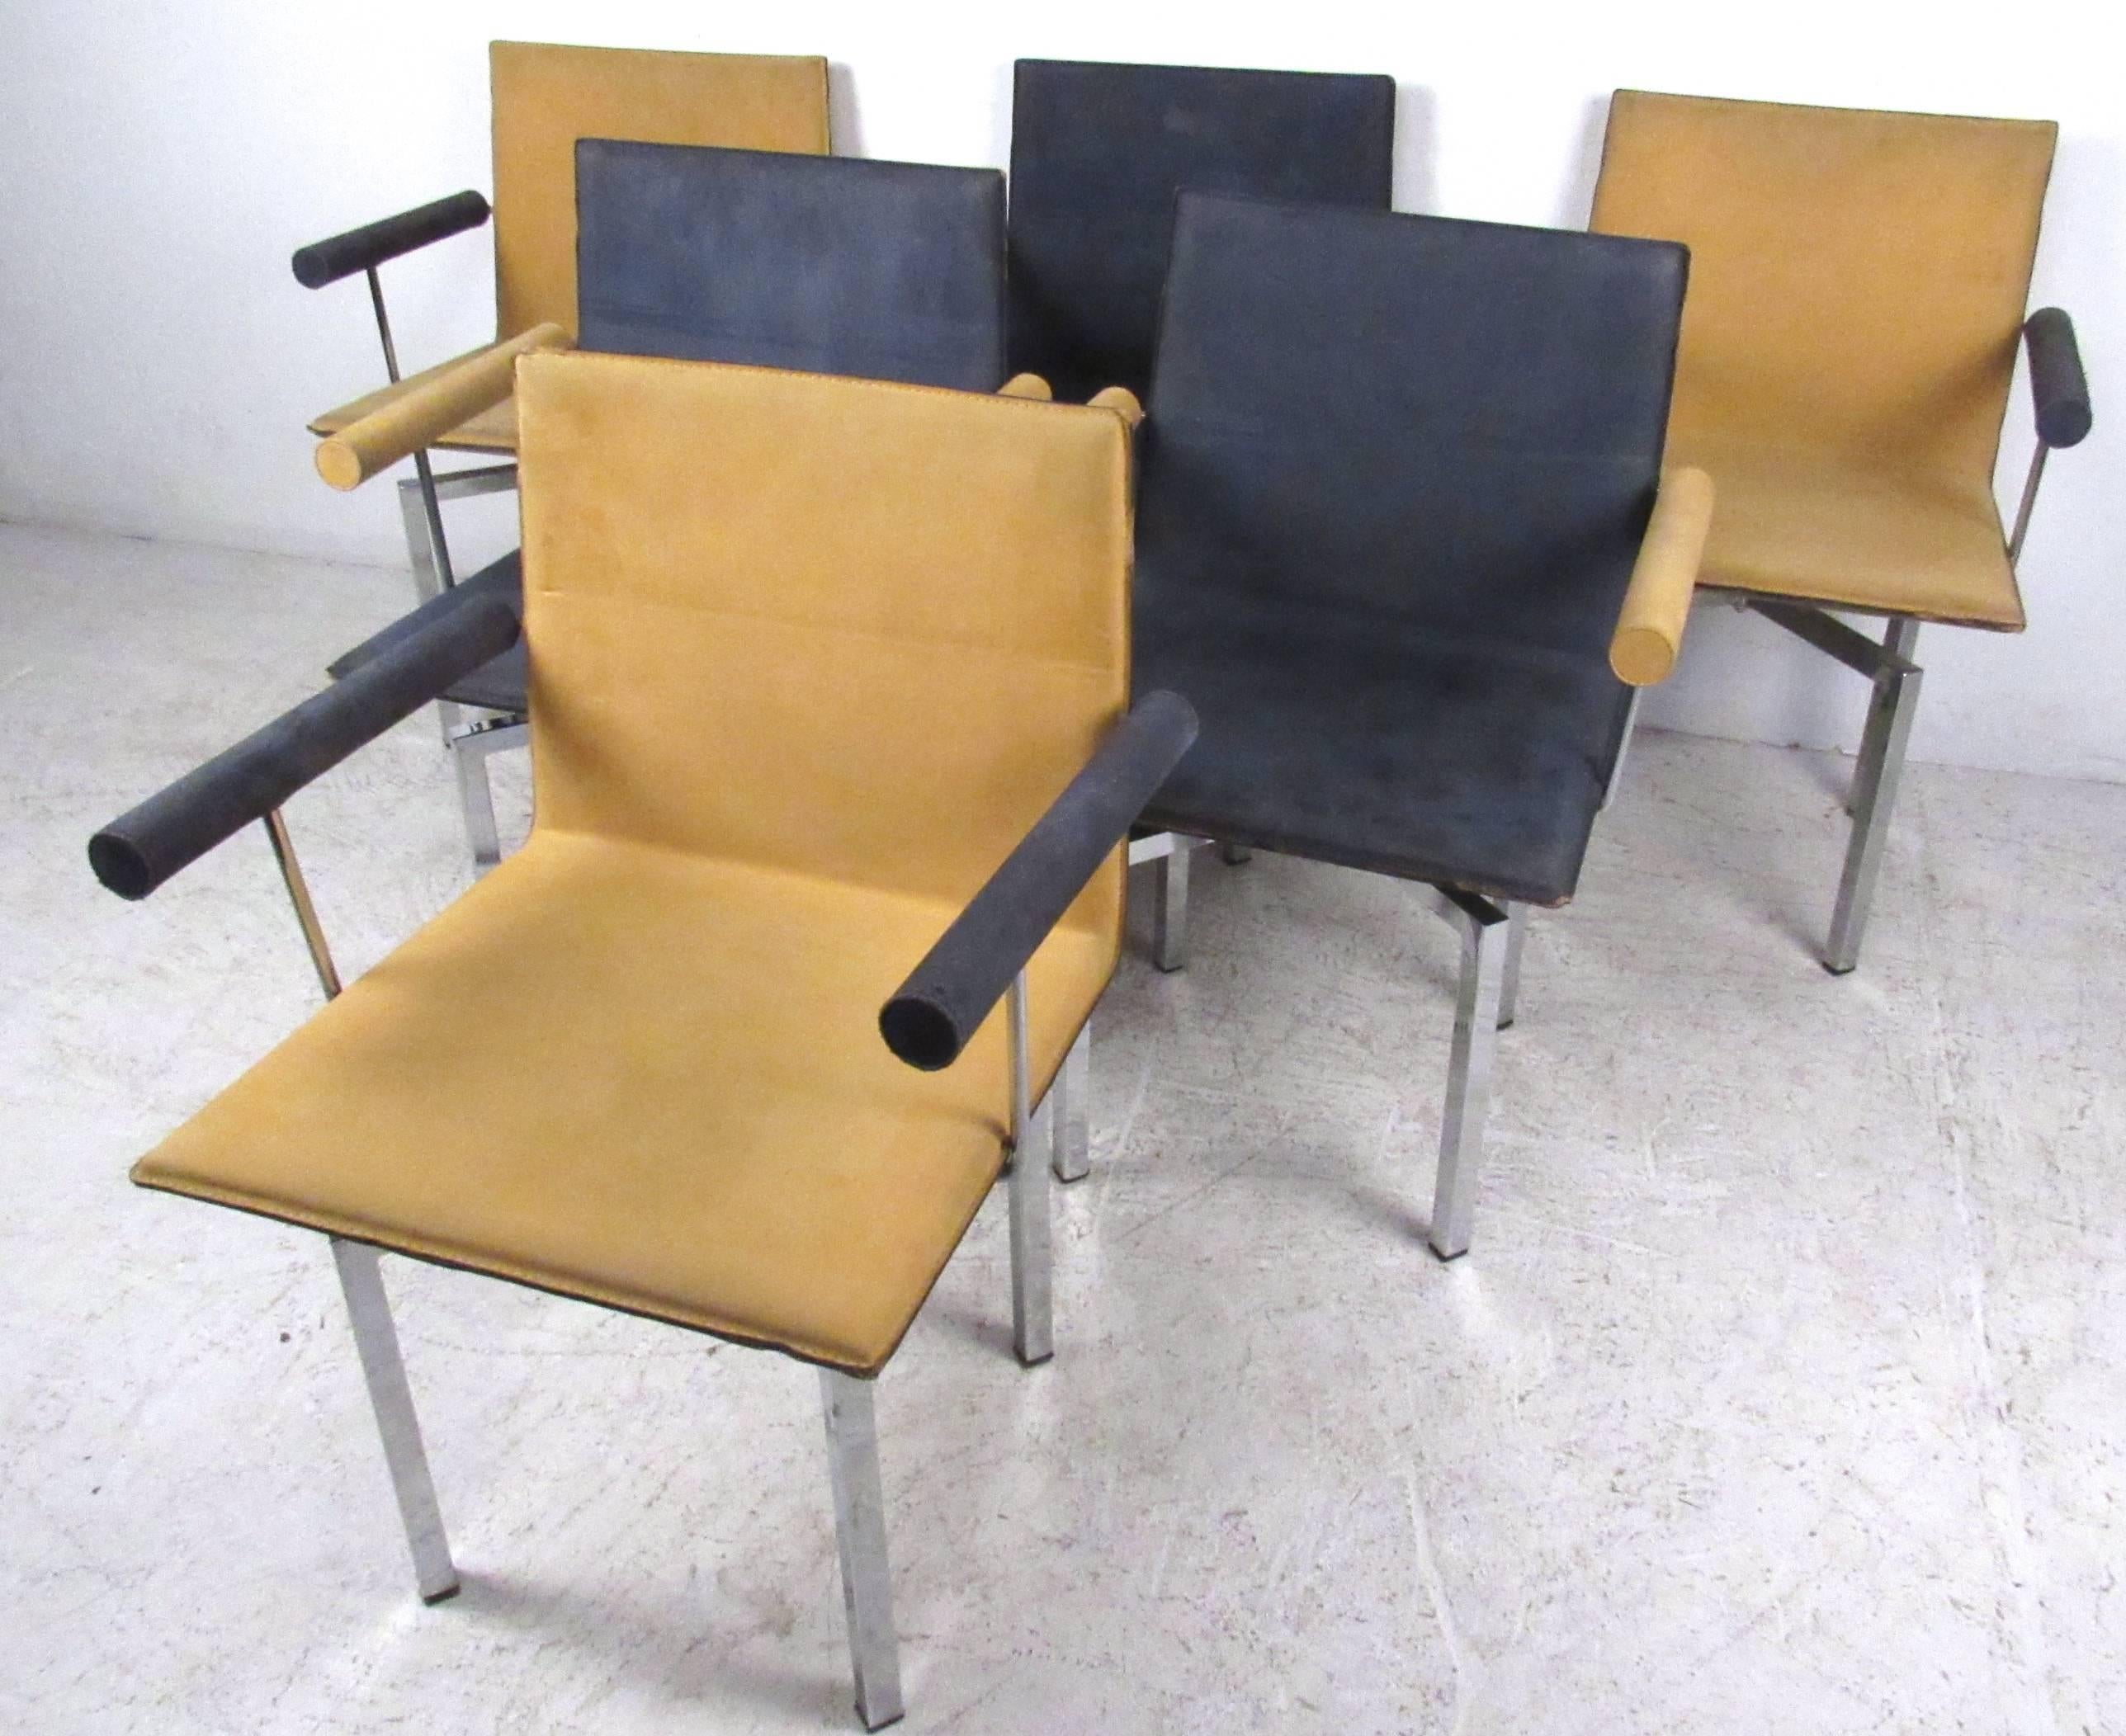 This Mid-Century style set of six two-tone dining chairs makes a funky retro addition to any dining room. Swivel seats, padded armrests, leather upholstery, and unique chrome base add to the style of these comfortable chairs. Please confirm item